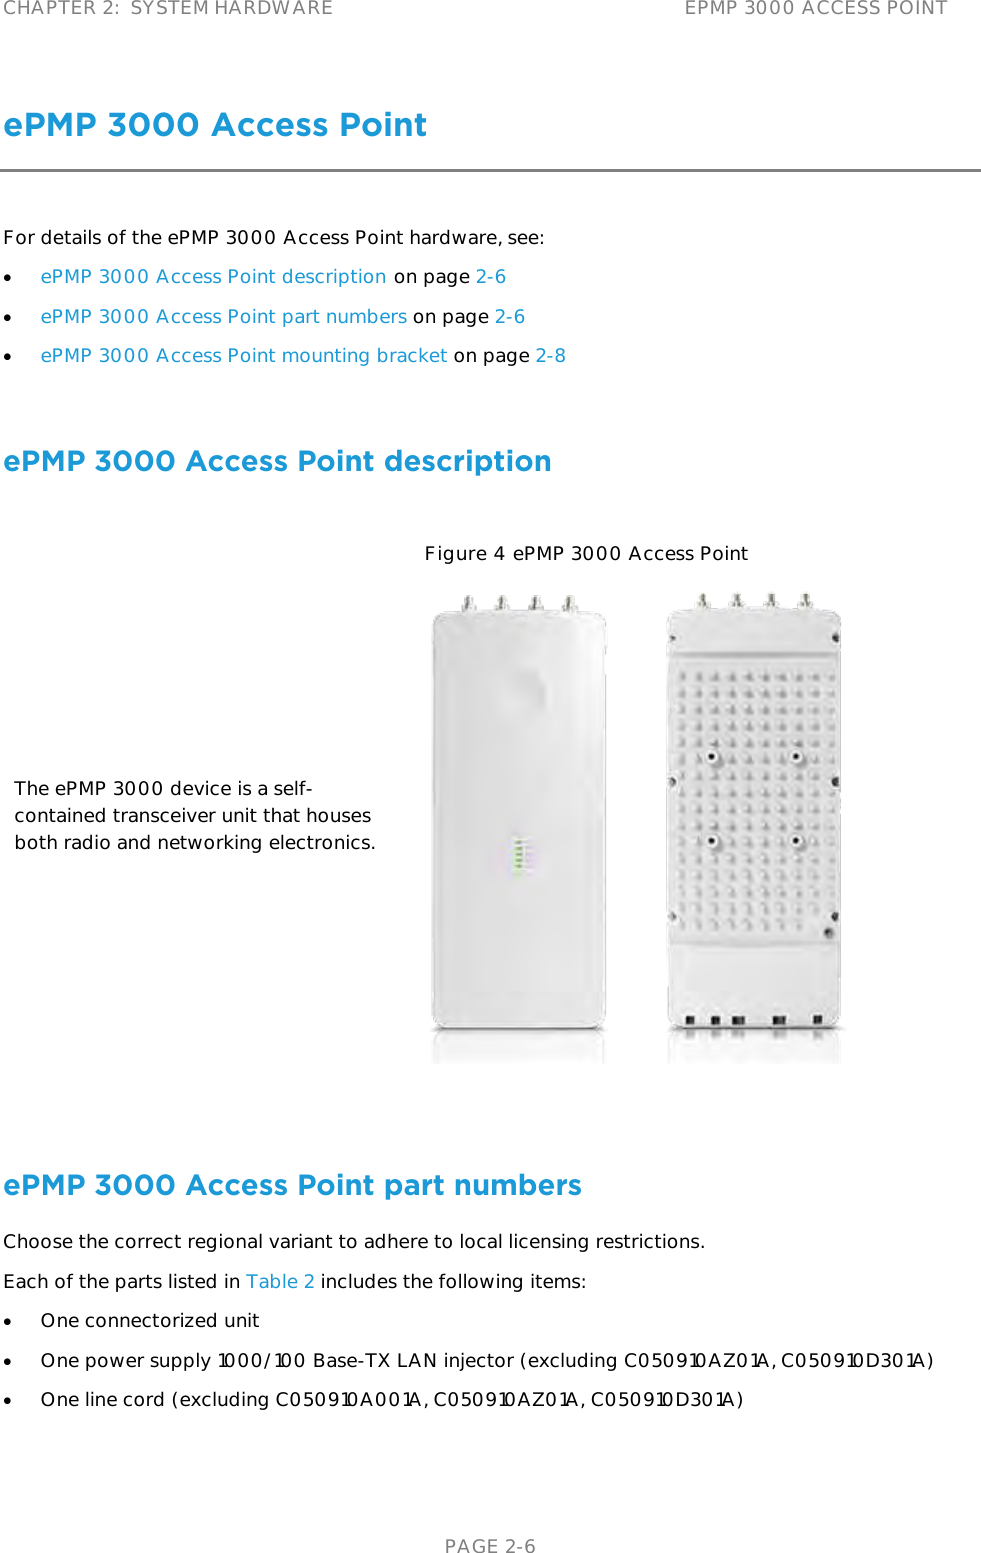 CHAPTER 2:  SYSTEM HARDWARE EPMP 3000 ACCESS POINT   PAGE 2-6 ePMP 3000 Access Point For details of the ePMP 3000 Access Point hardware, see:  ePMP 3000 Access Point description on page 2-6  ePMP 3000 Access Point part numbers on page 2-6  ePMP 3000 Access Point mounting bracket on page 2-8  ePMP 3000 Access Point description The ePMP 3000 device is a self-contained transceiver unit that houses both radio and networking electronics.  Figure 4 ePMP 3000 Access Point   ePMP 3000 Access Point part numbers Choose the correct regional variant to adhere to local licensing restrictions. Each of the parts listed in Table 2 includes the following items:  One connectorized unit  One power supply 1000/100 Base-TX LAN injector (excluding C050910AZ01A, C050910D301A)  One line cord (excluding C050910A001A, C050910AZ01A, C050910D301A) 